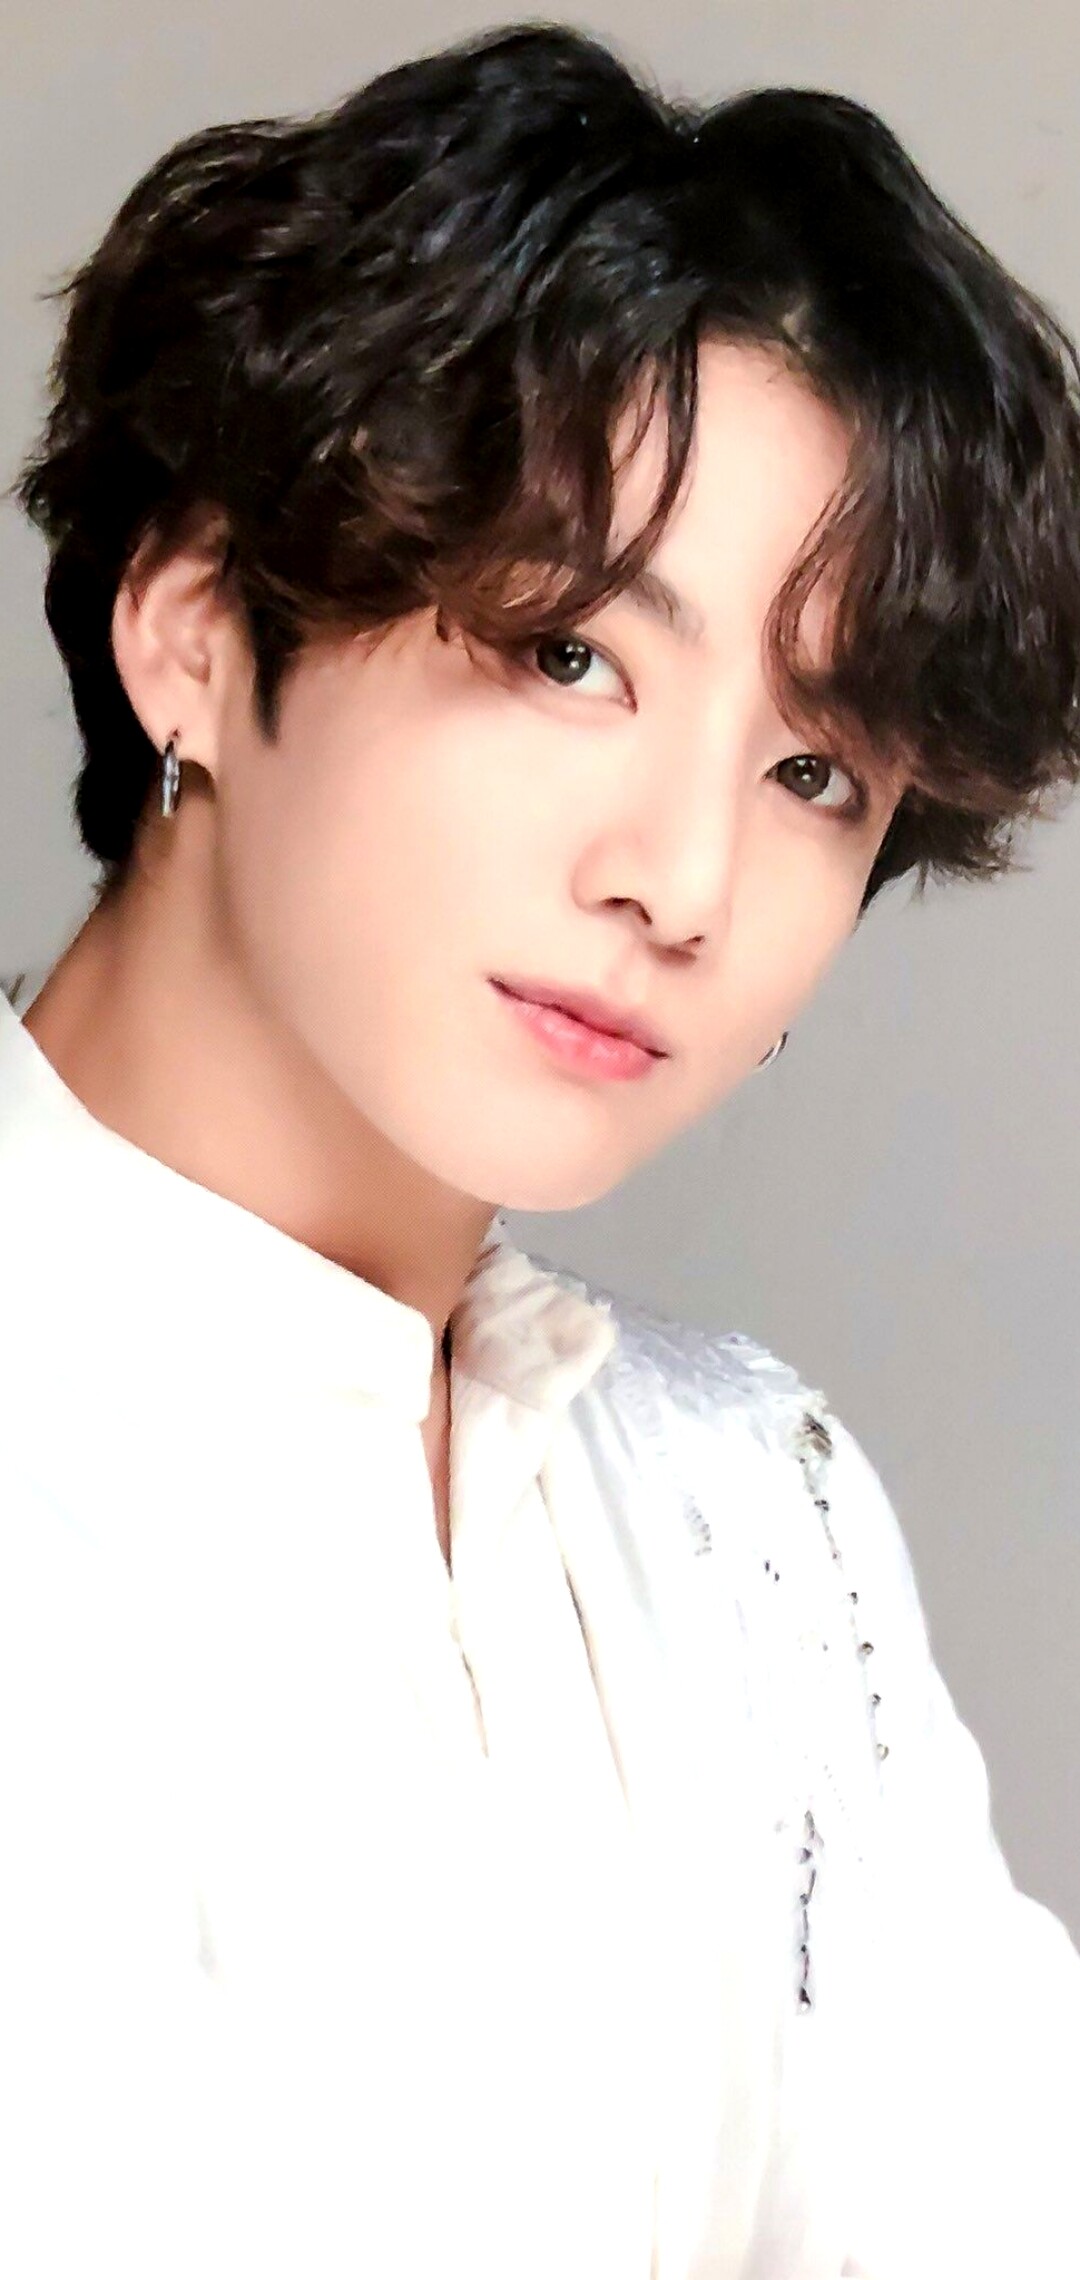 Jungkook: The youngest member of a South Korean K-pop idol boy group, BTS. 1080x2280 HD Wallpaper.